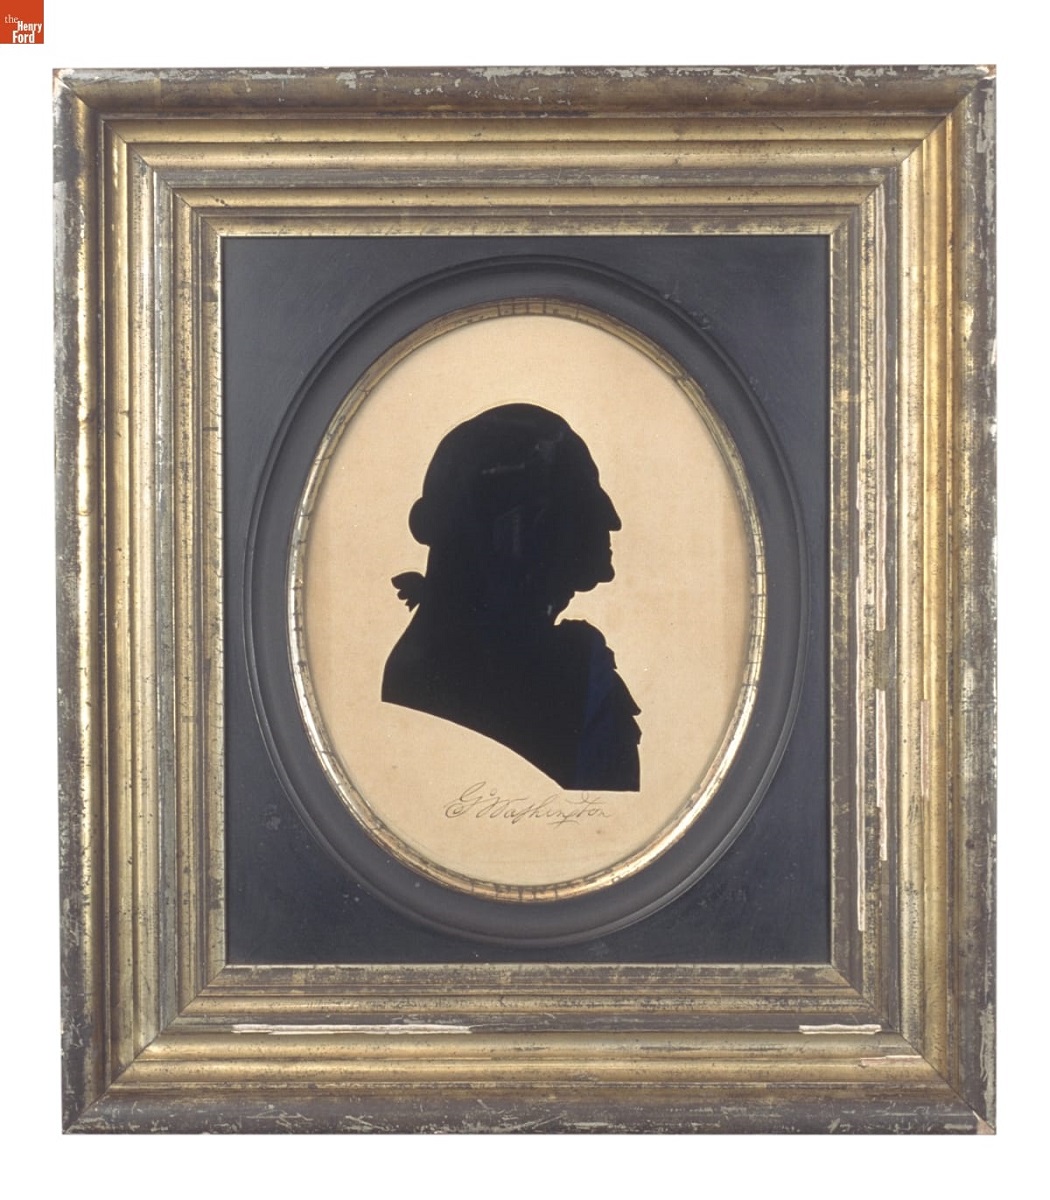 Black silhouette of person's head and shoulders, oval-matted and in ribbed gold frame